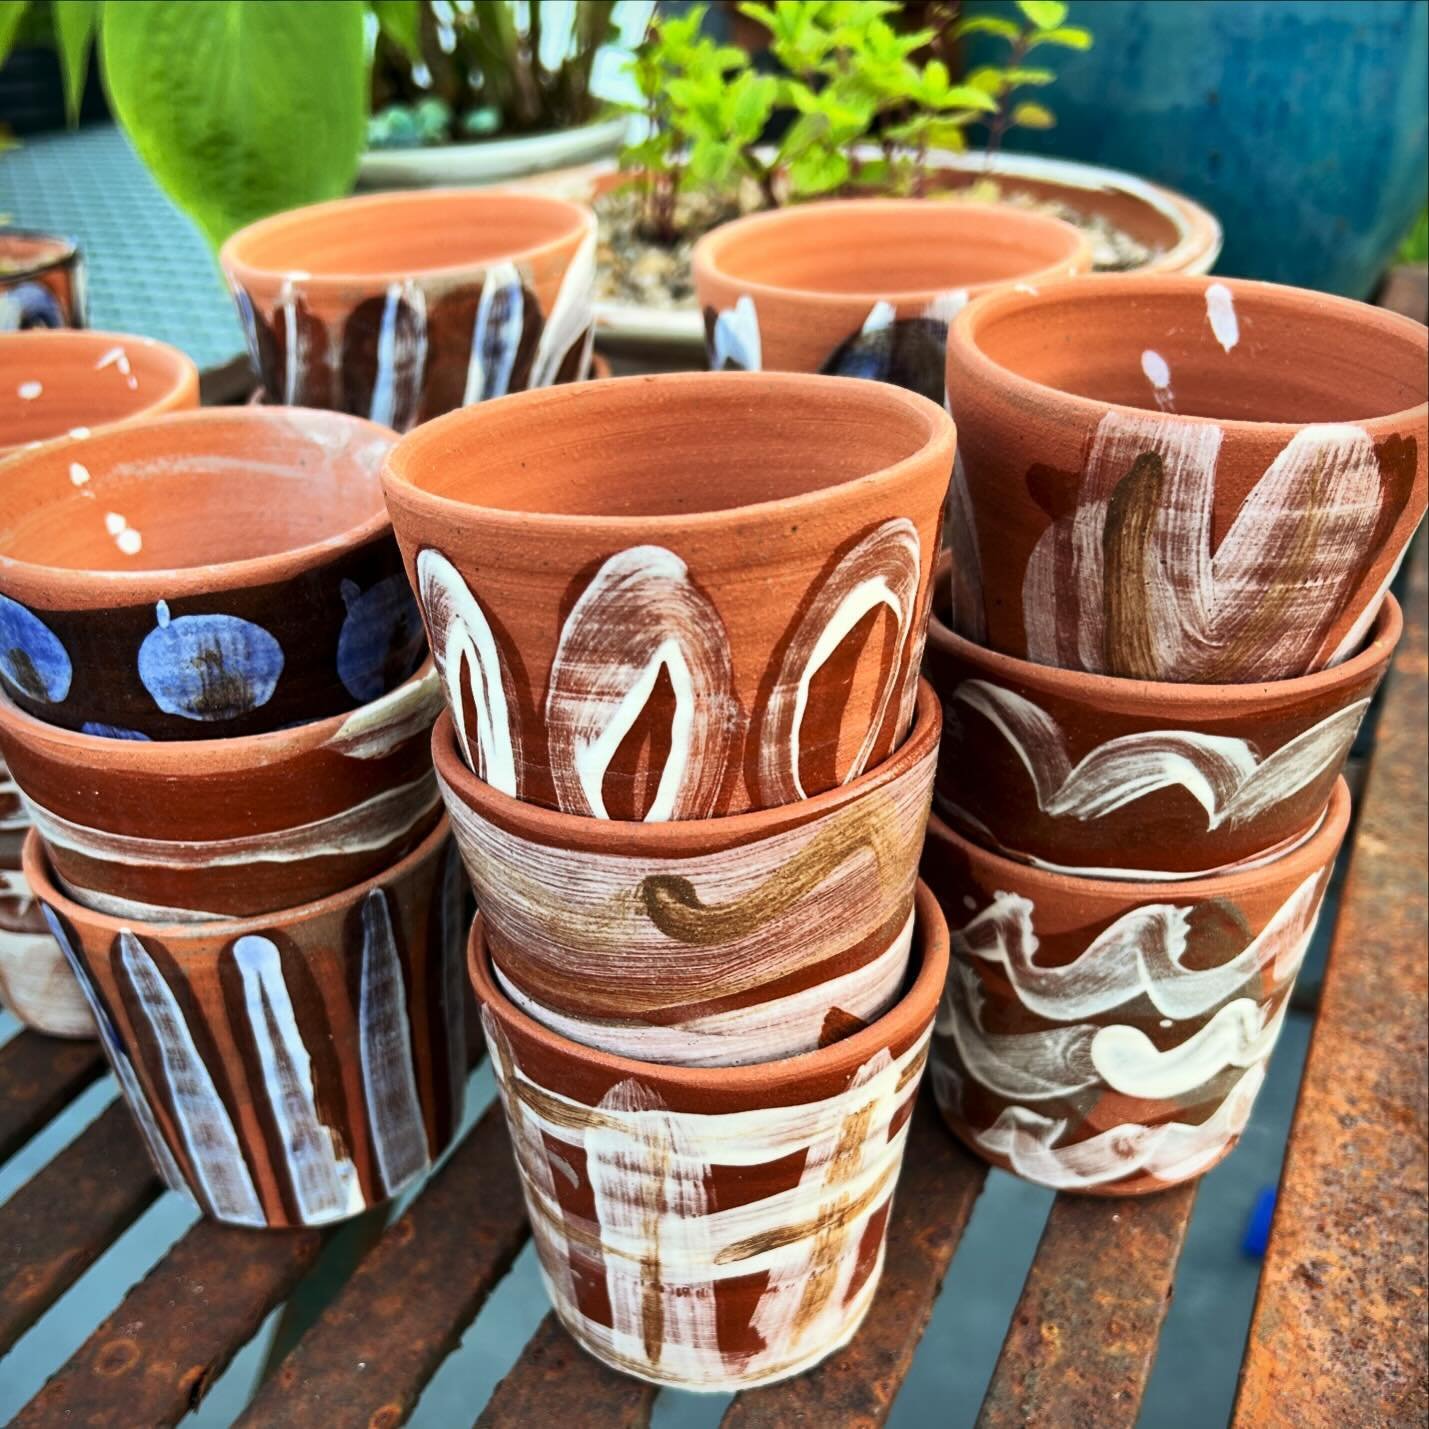 Just got half a ton of terracotta clay to throw some plantpots. These are decorated with slip and glaze and are once-fired, which means I can dust off my production throwing skills and make them in large batches.
Anyone recommend a good garden fair i